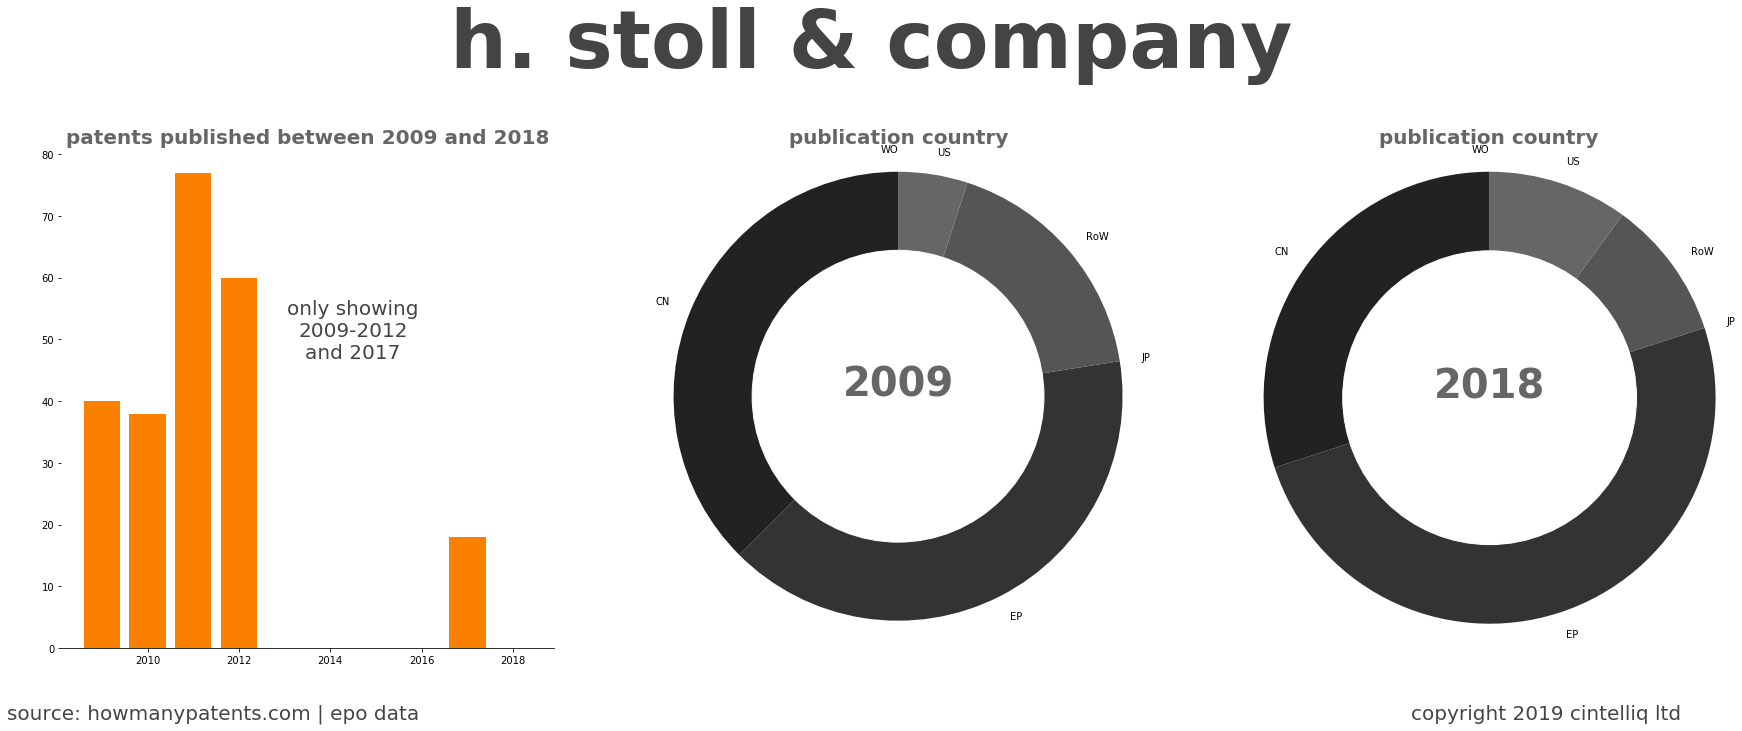 summary of patents for H. Stoll & Company